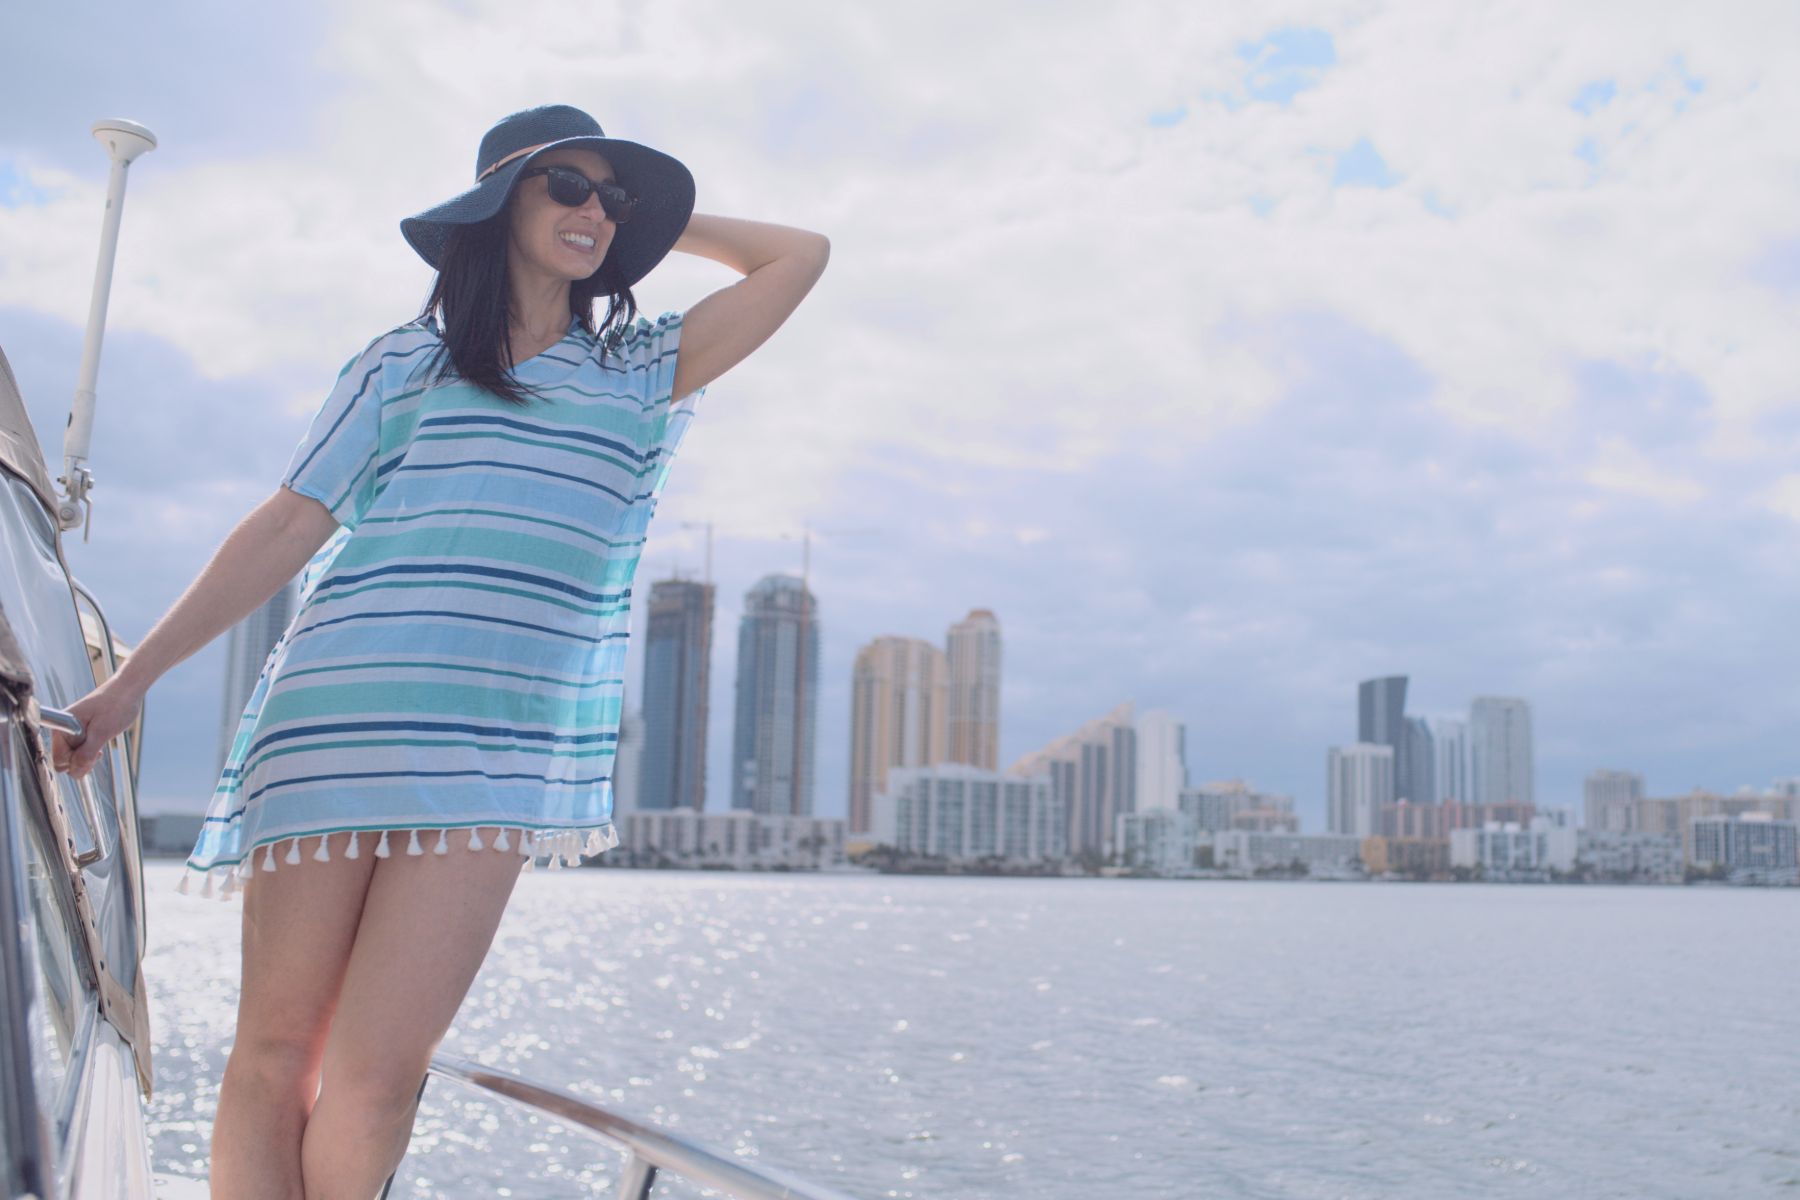 Macken Koya Bay Woman wearing hat, sunglasses and a multicolored blue top posing on a yacht with the city coastline in the background